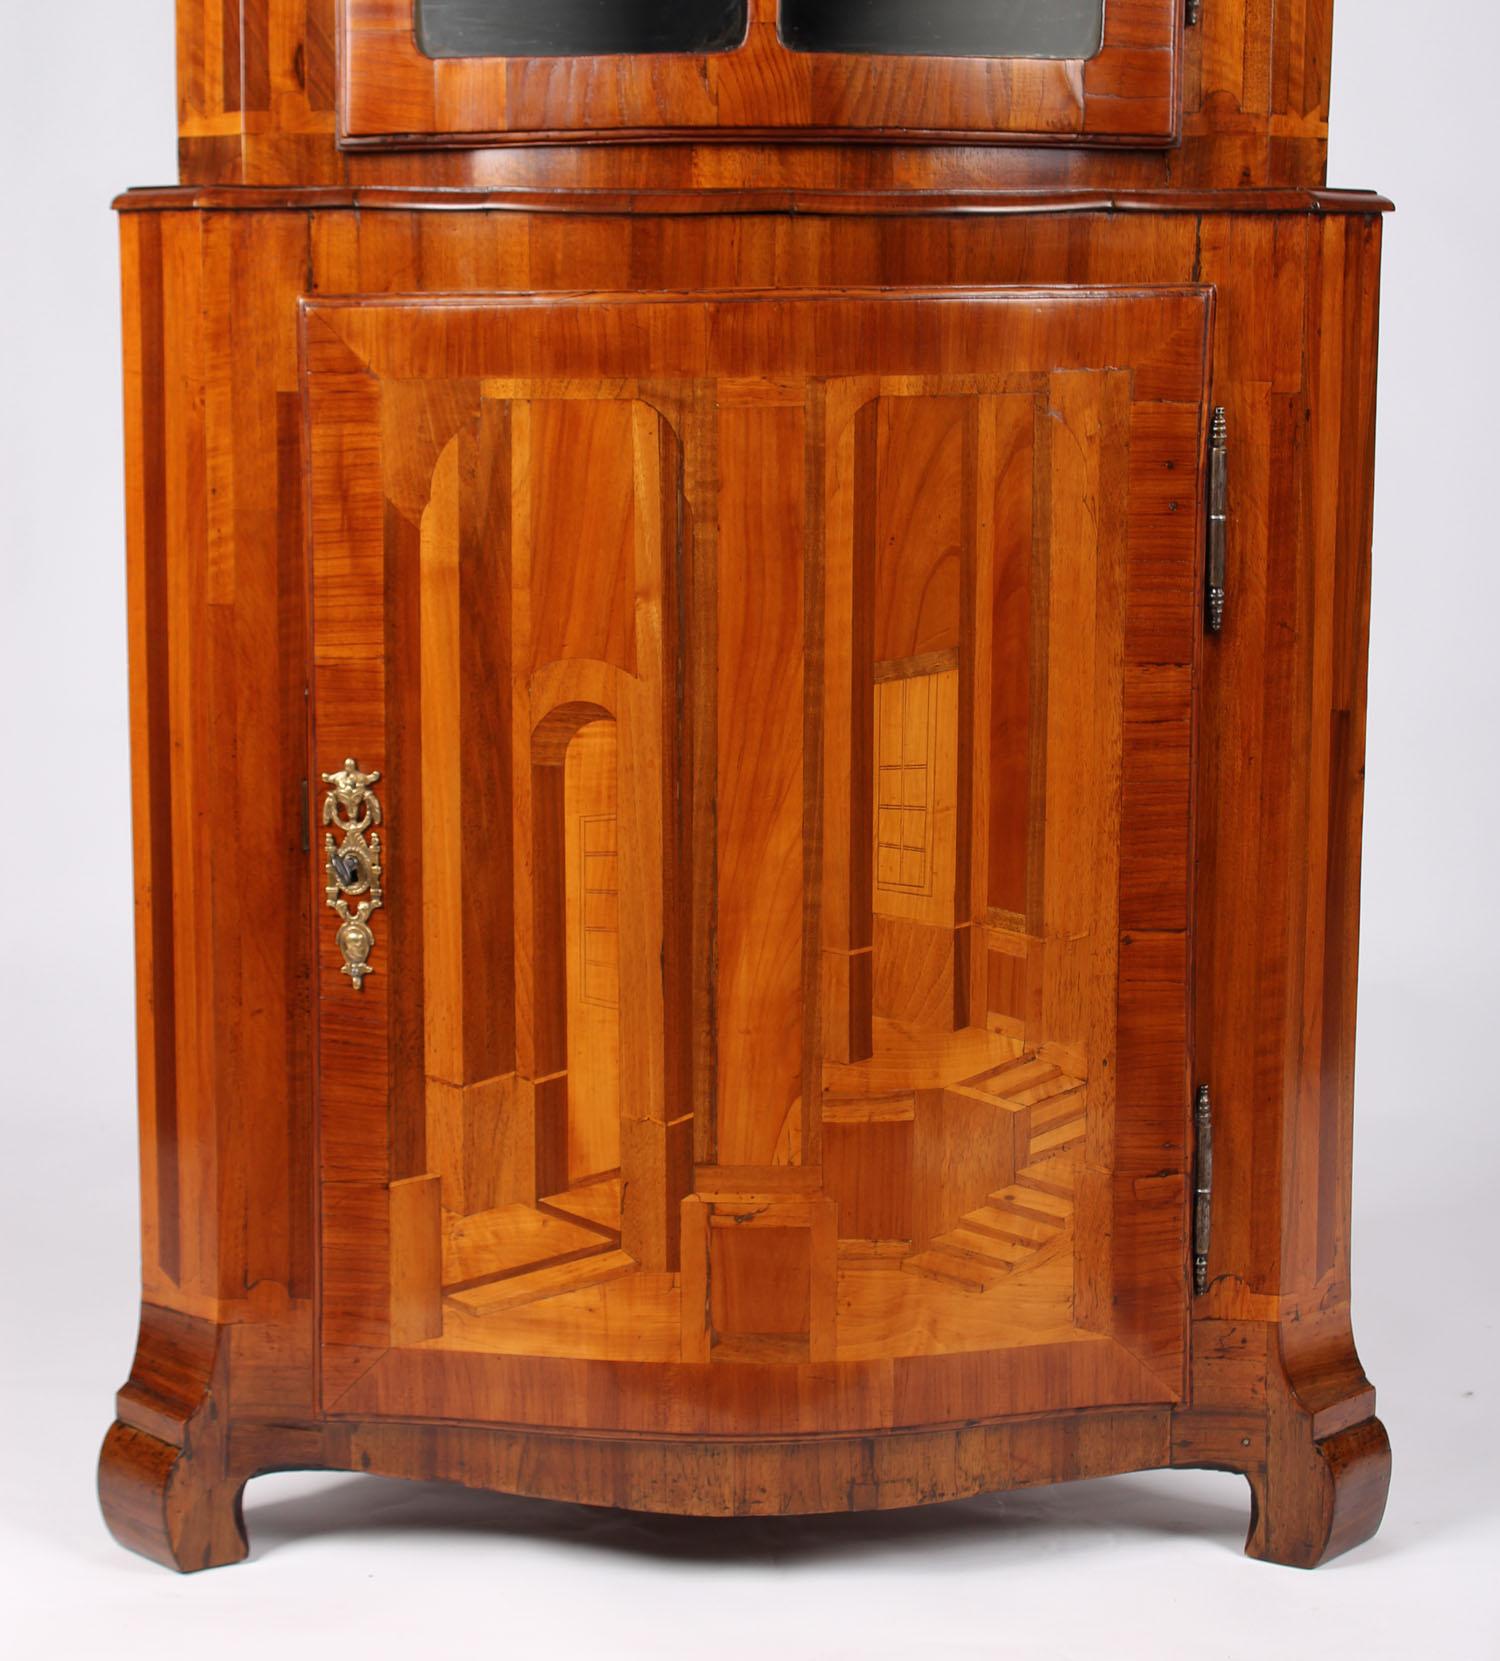 Small corner cabinet with inlays

Switzerland or Northern Italy
Walnut and others
Transition, circa 1770-1790

Dimensions: Height 165 cm, width 72 cm, depth of thigh 52 cm


Small corner cabinet standing on curved, slightly flared feet in